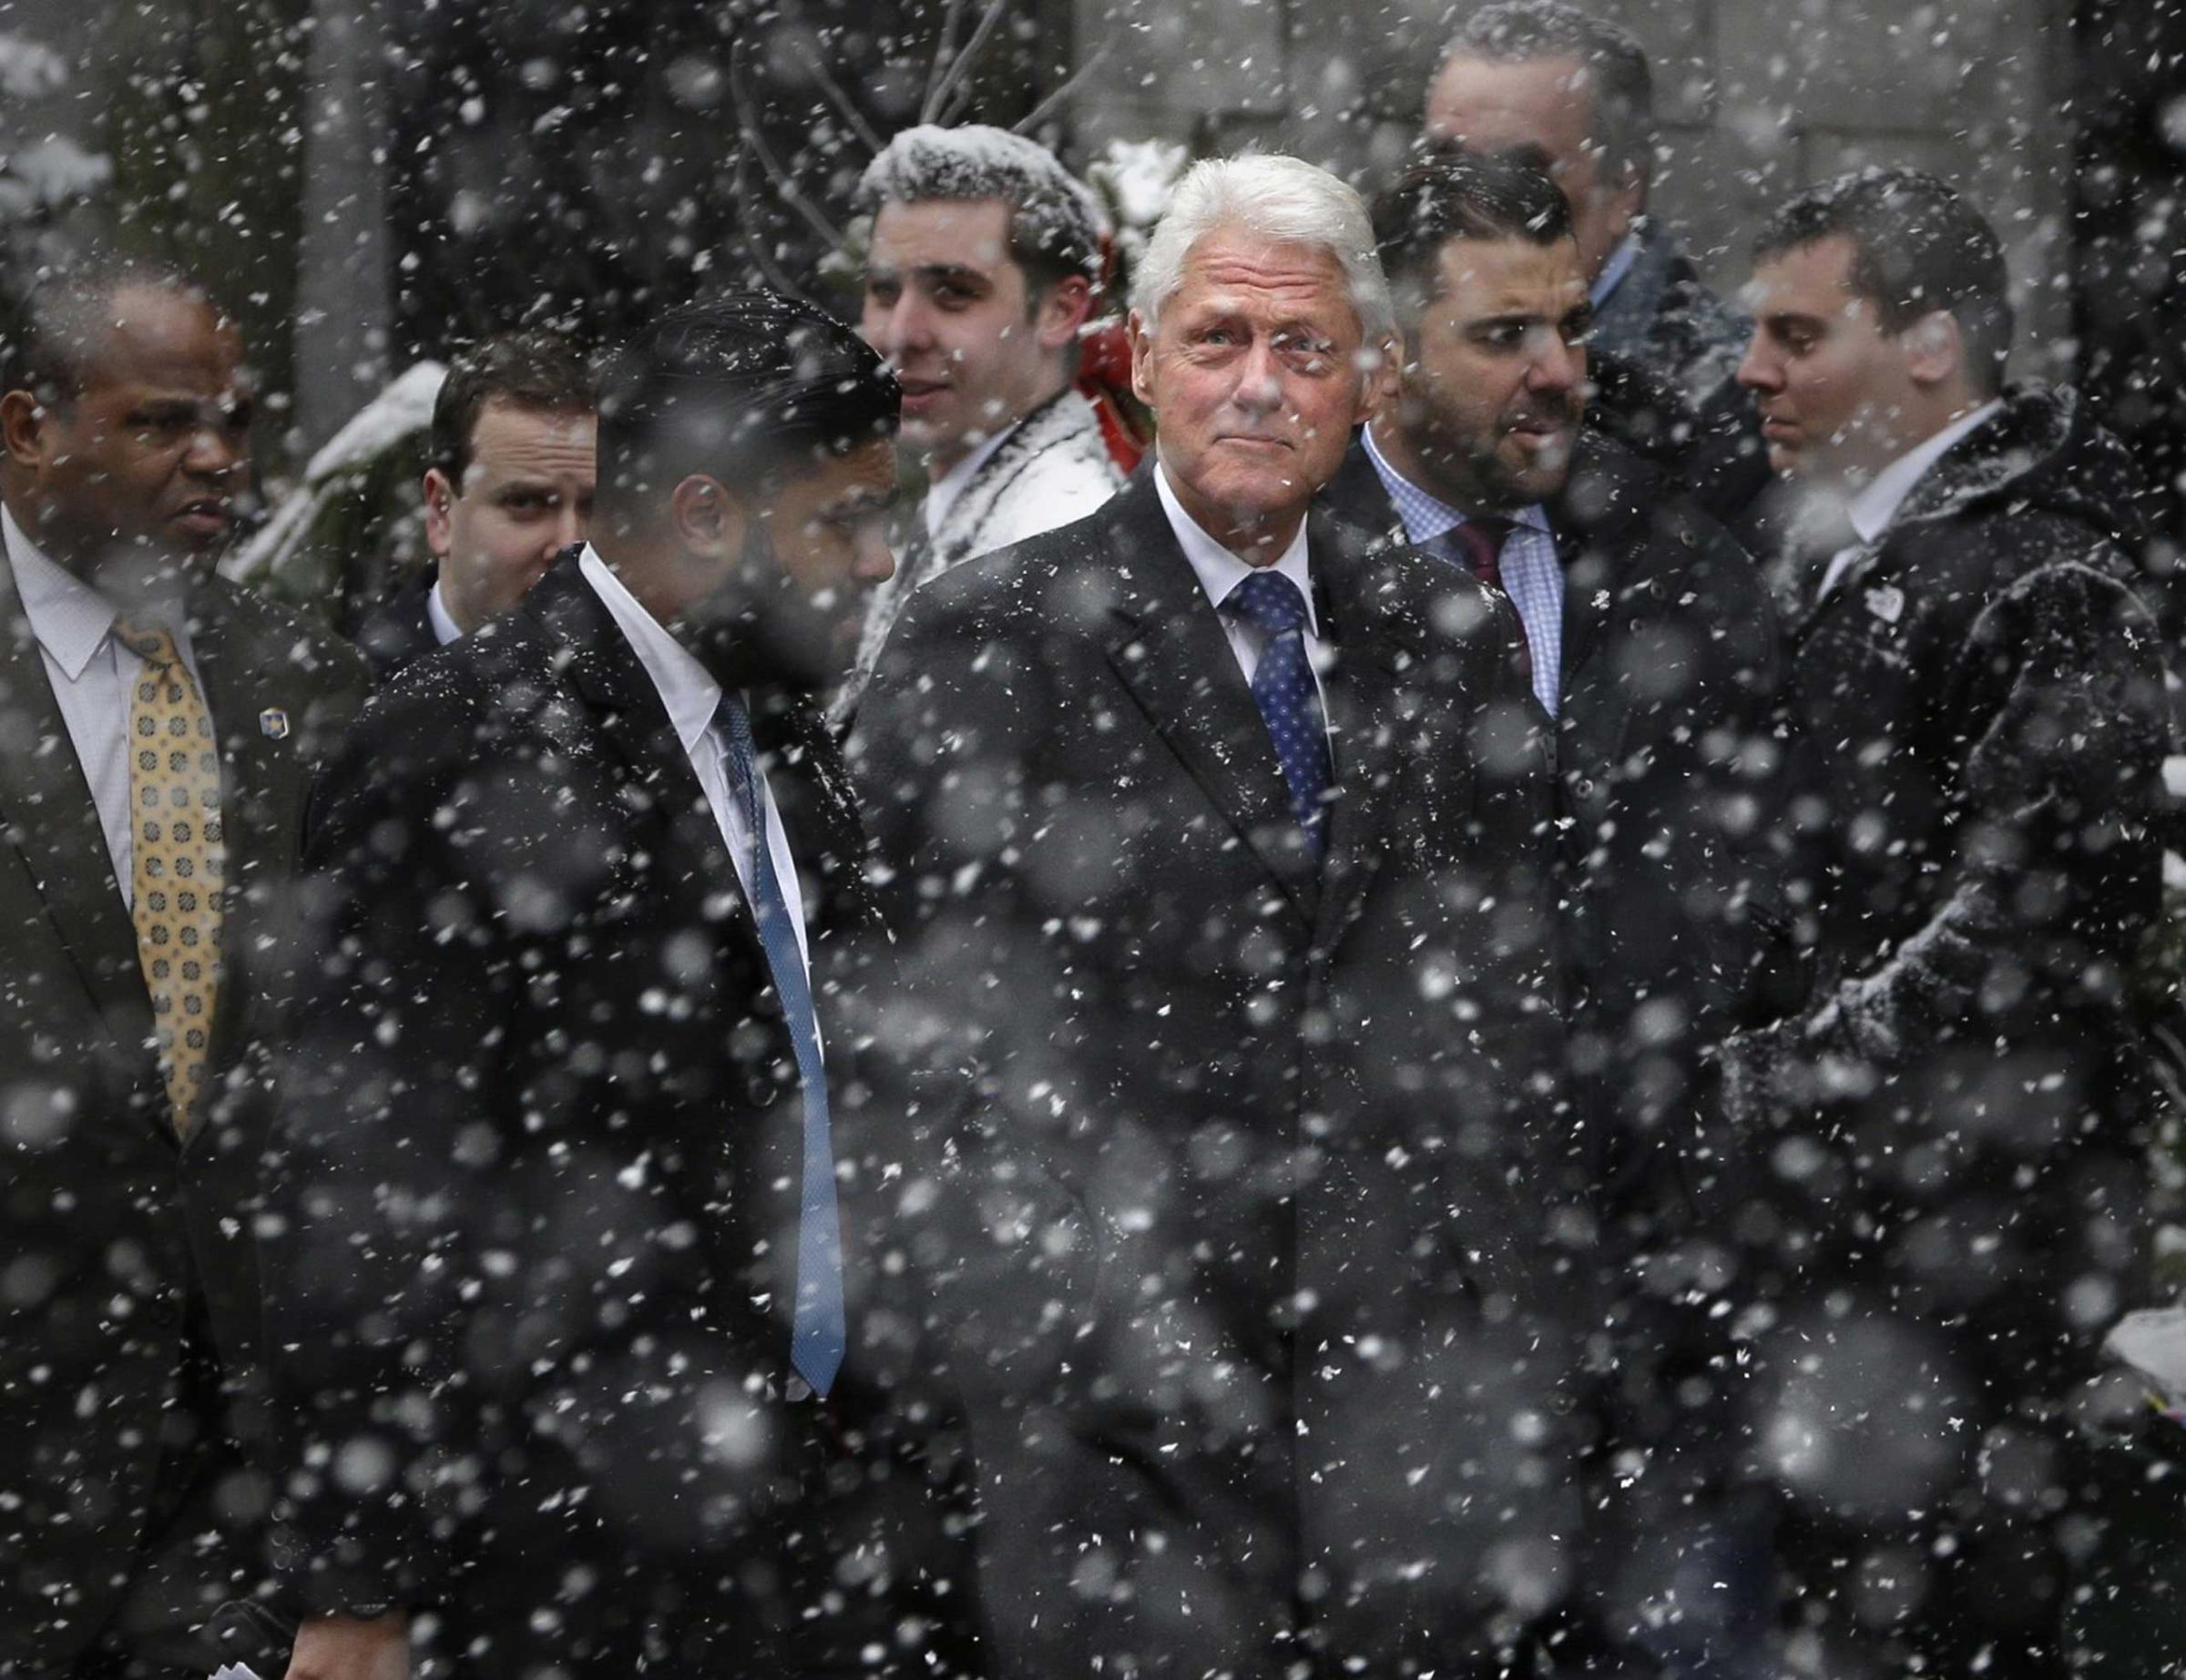 Former United States President Bill Clinton arrives for Mario Cuomo's funeral at the Church of St. Ignatius Loyola in New York on Jan. 6, 2015.